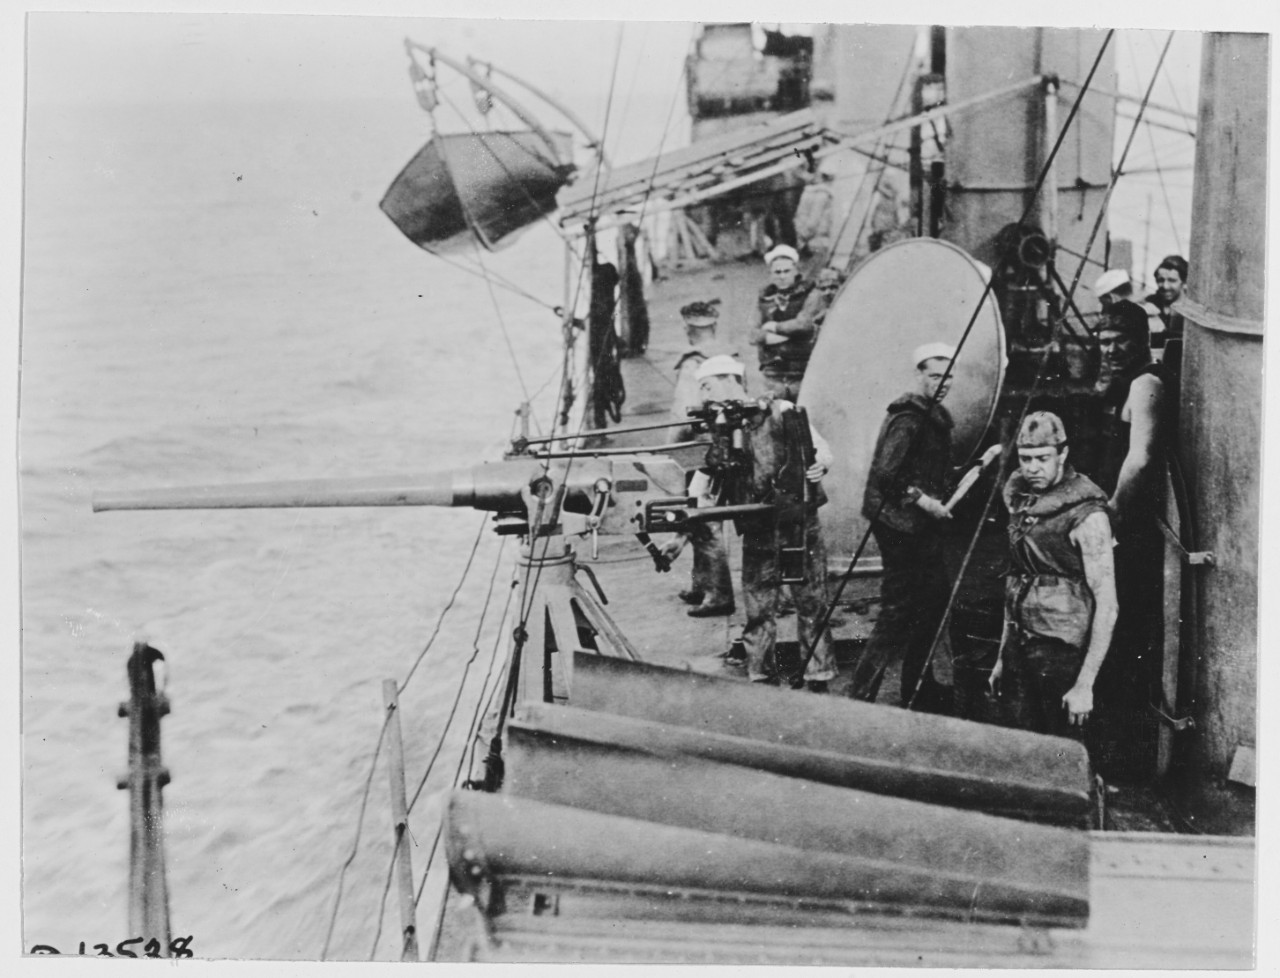 6 pounder and crew aboard USS WHIPPLE at sea, May 18, 1918